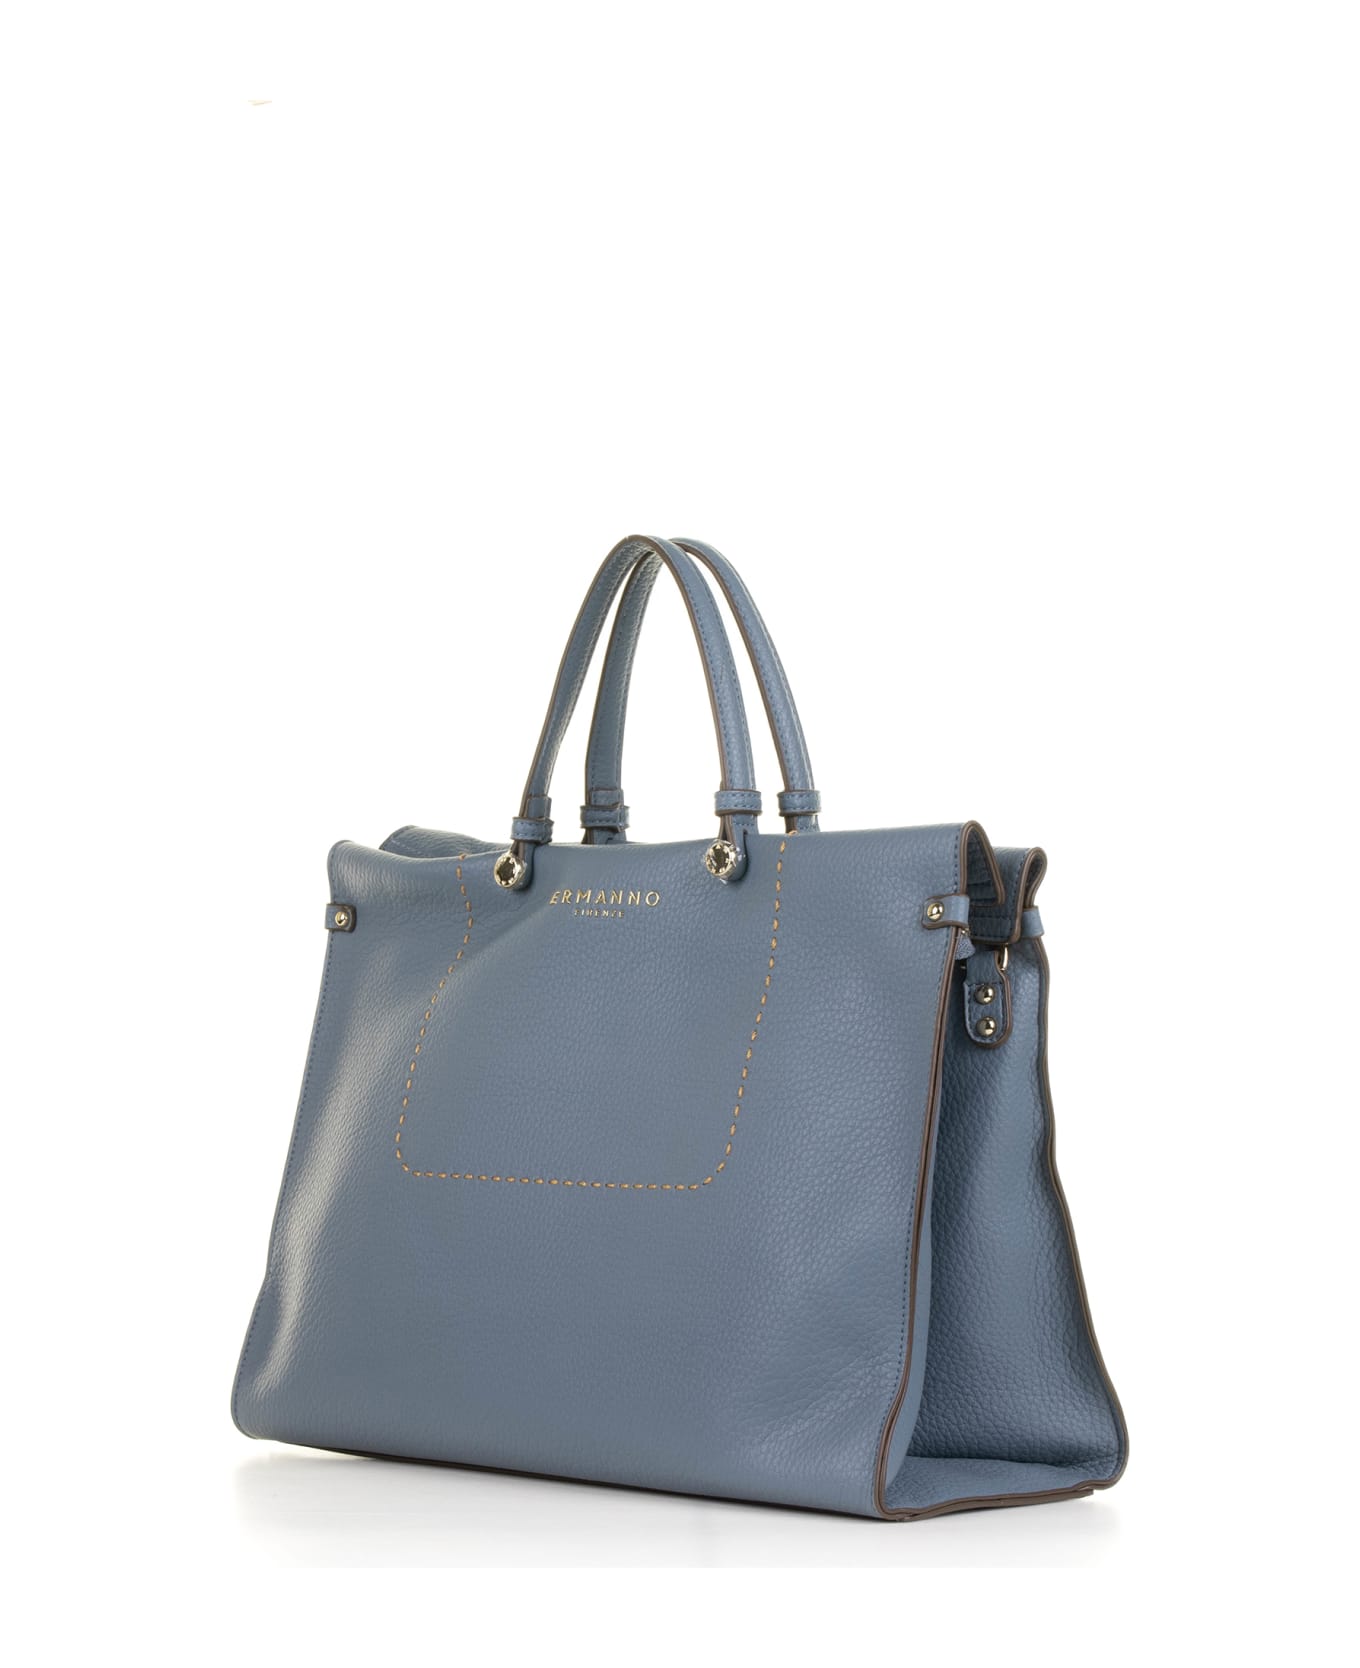 Ermanno Scervino Petra Light Blue Shopping Bag In Textured Eco-leather - AZZURRO